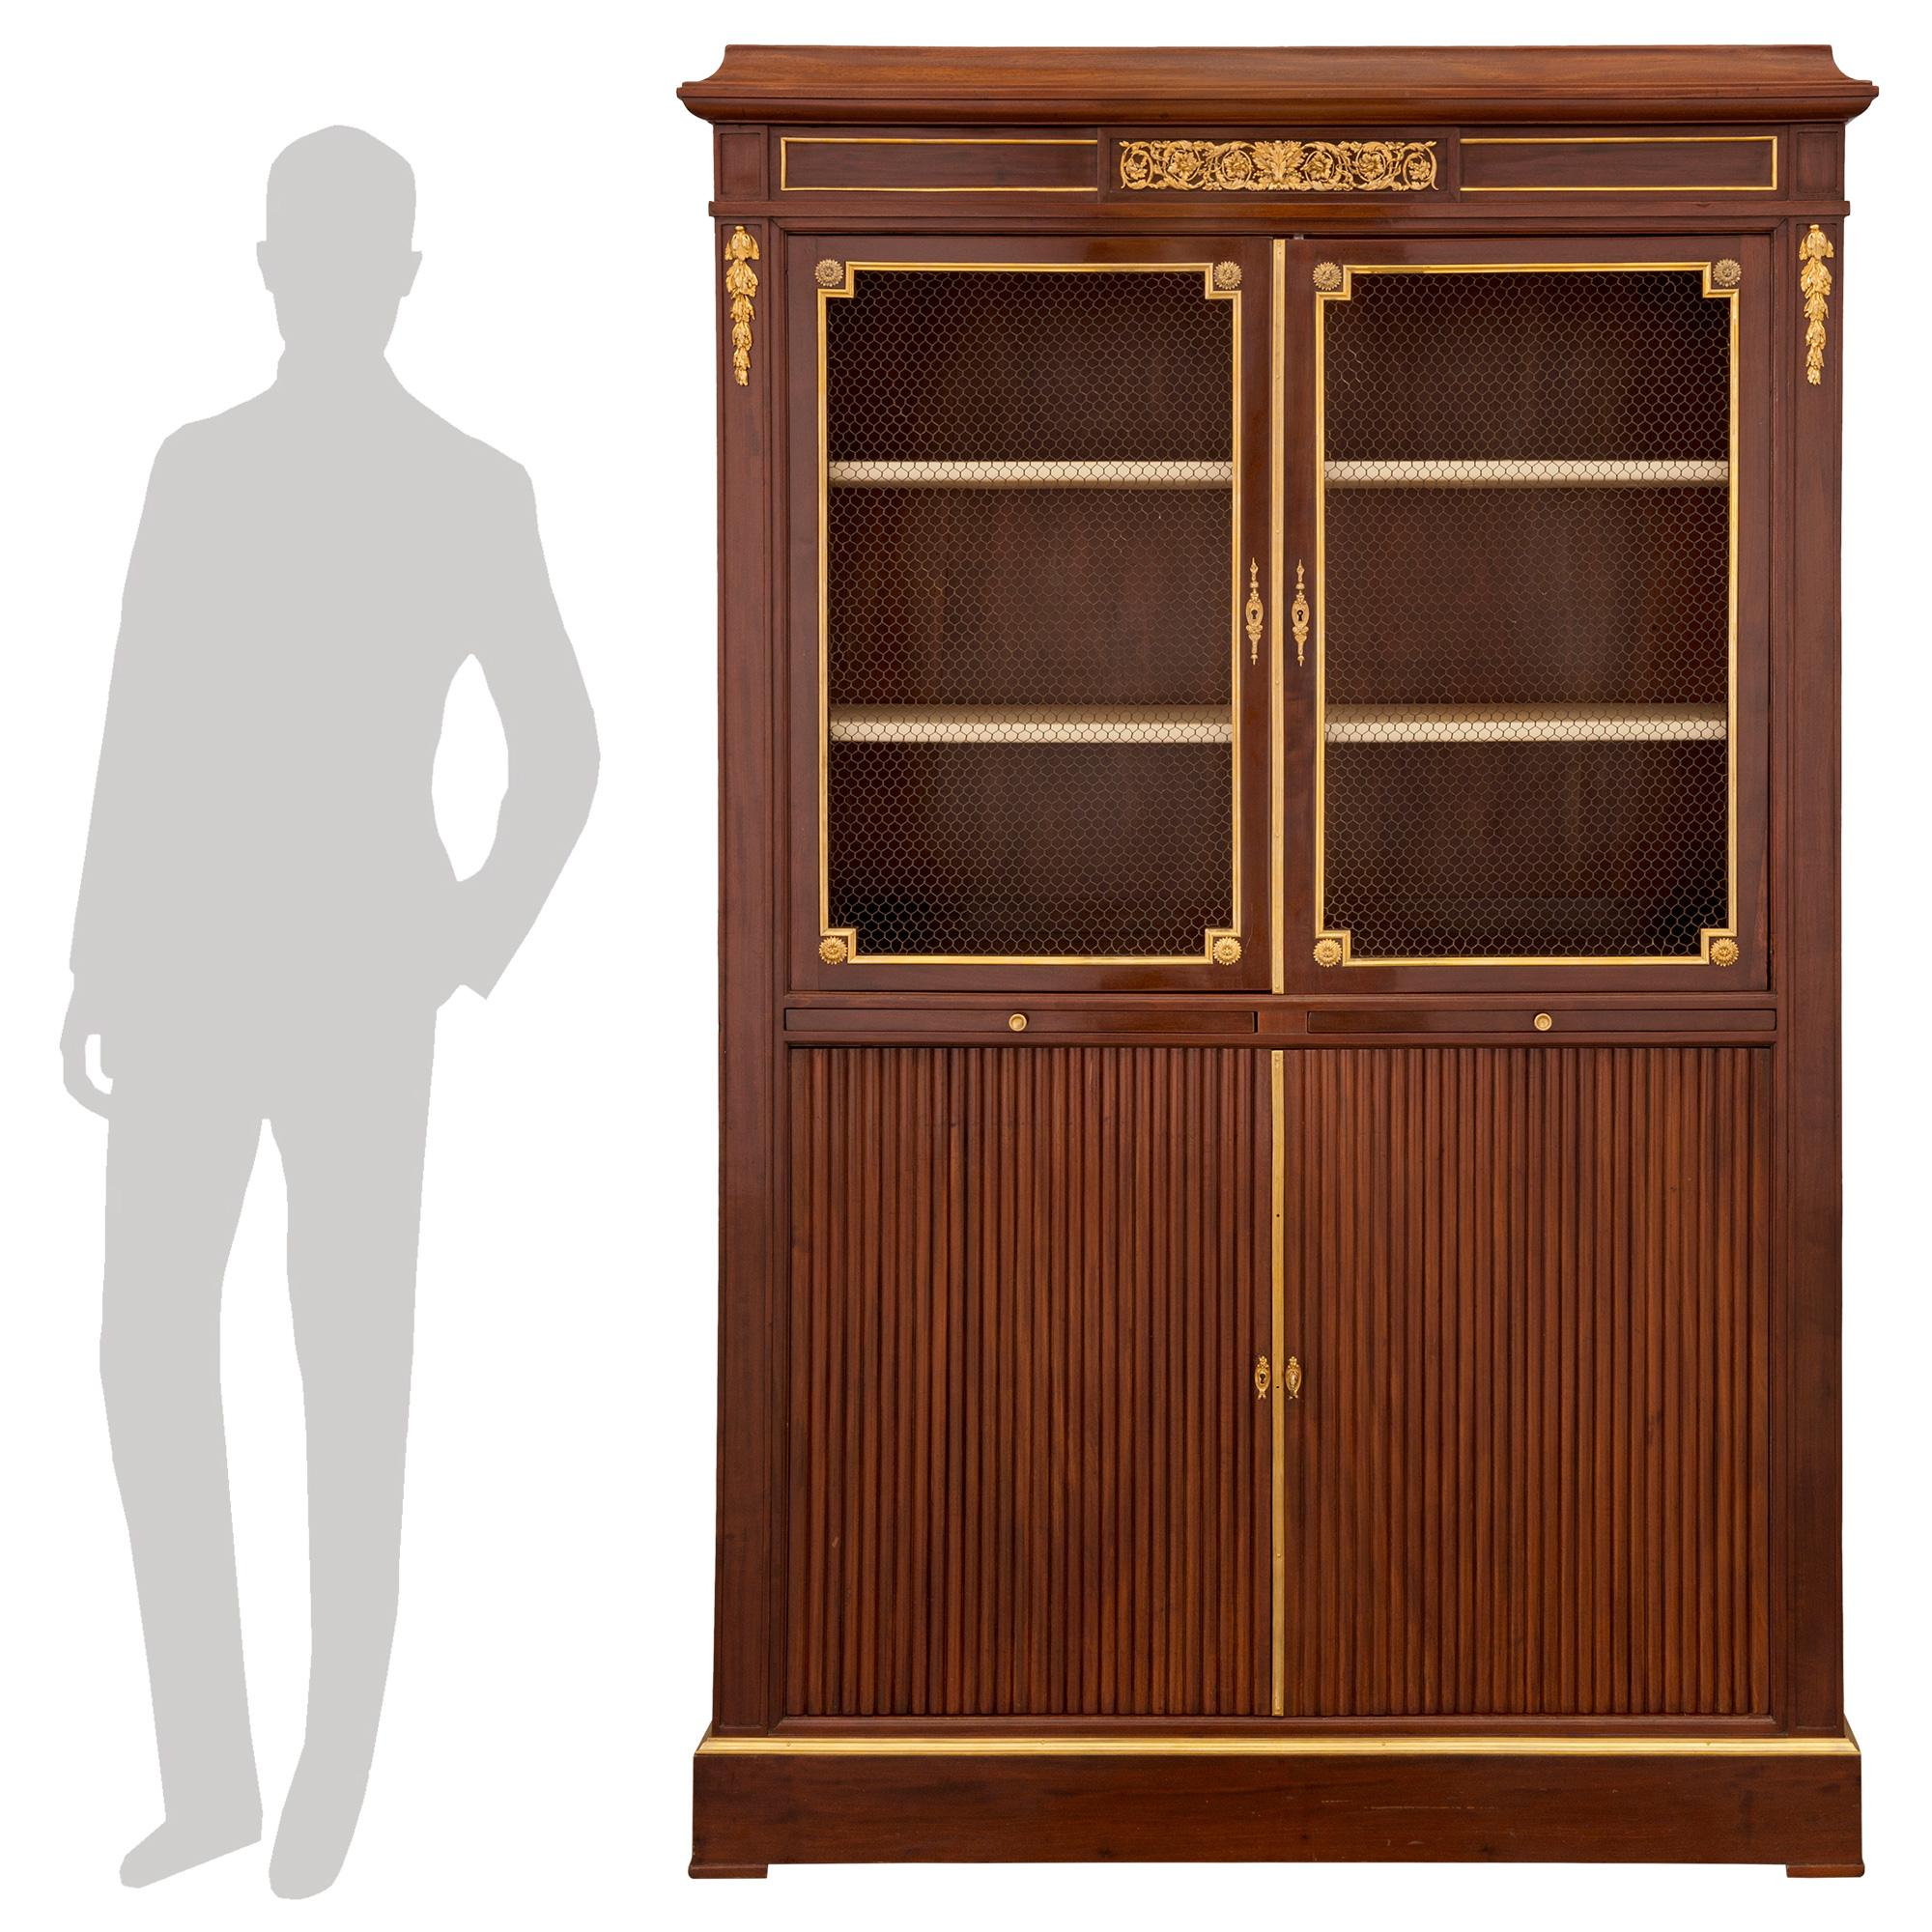 A handsome and high quality French 19th century Louis XVI st. mahogany and ormolu display cabinet, signed KRIEGER. The cabinet is raised by discreet elegant feet below the straight frieze. Above a fine mottled ormolu band are two doors with